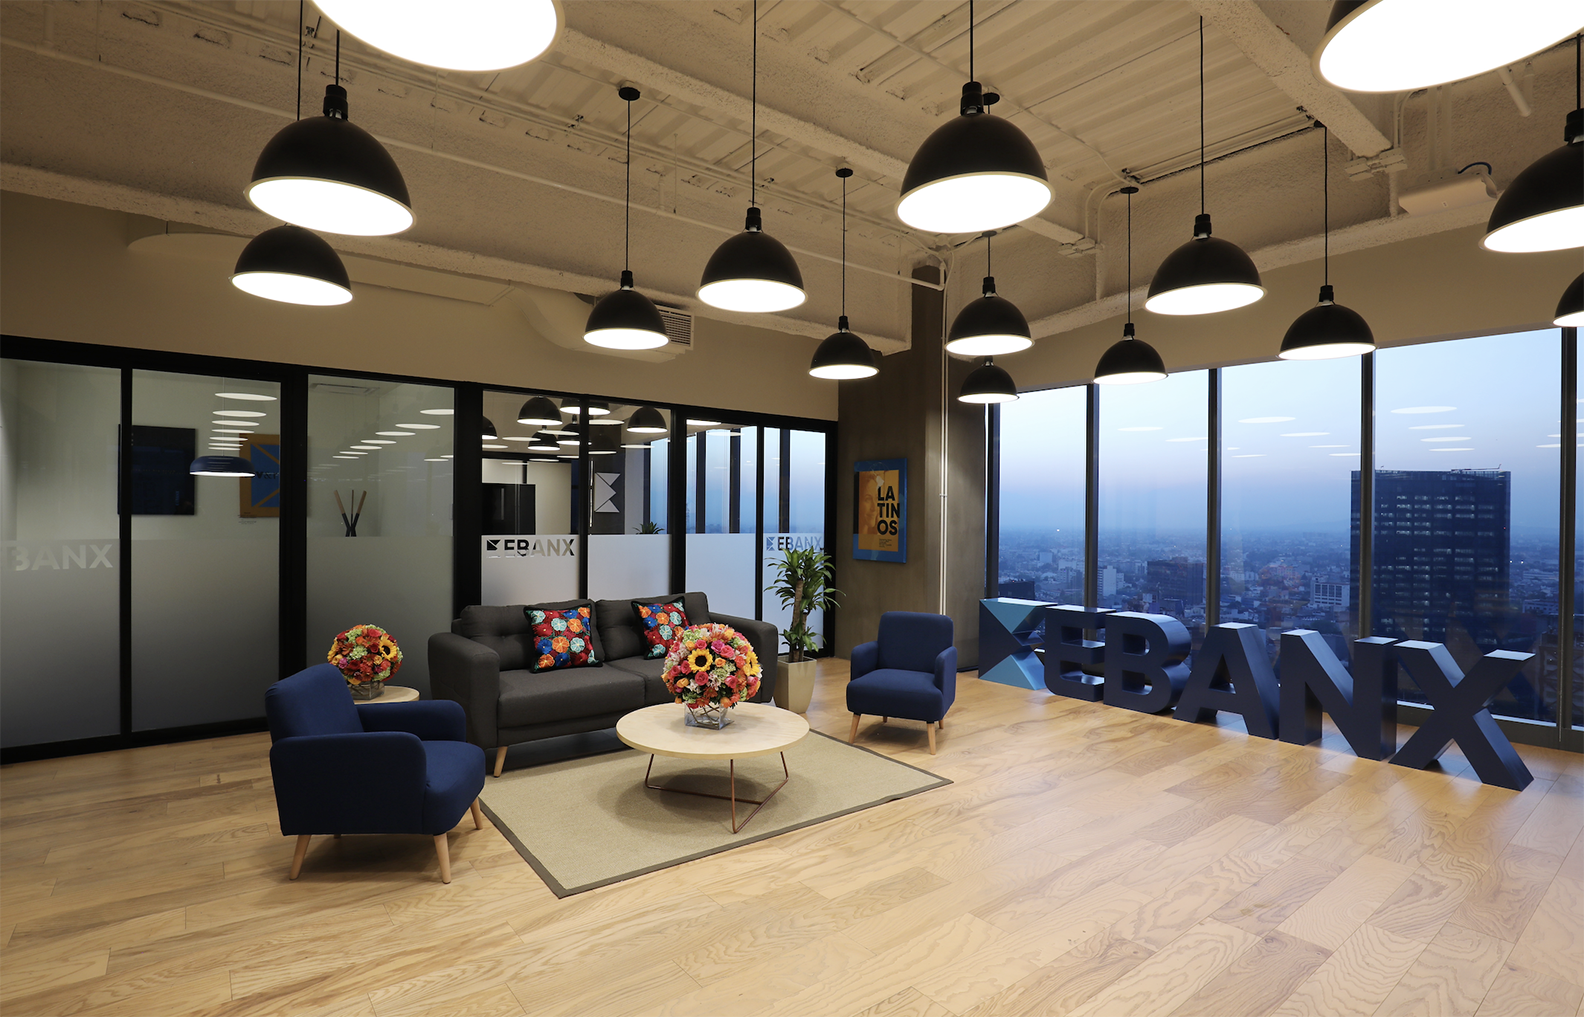 New EBANX office in Mexico City